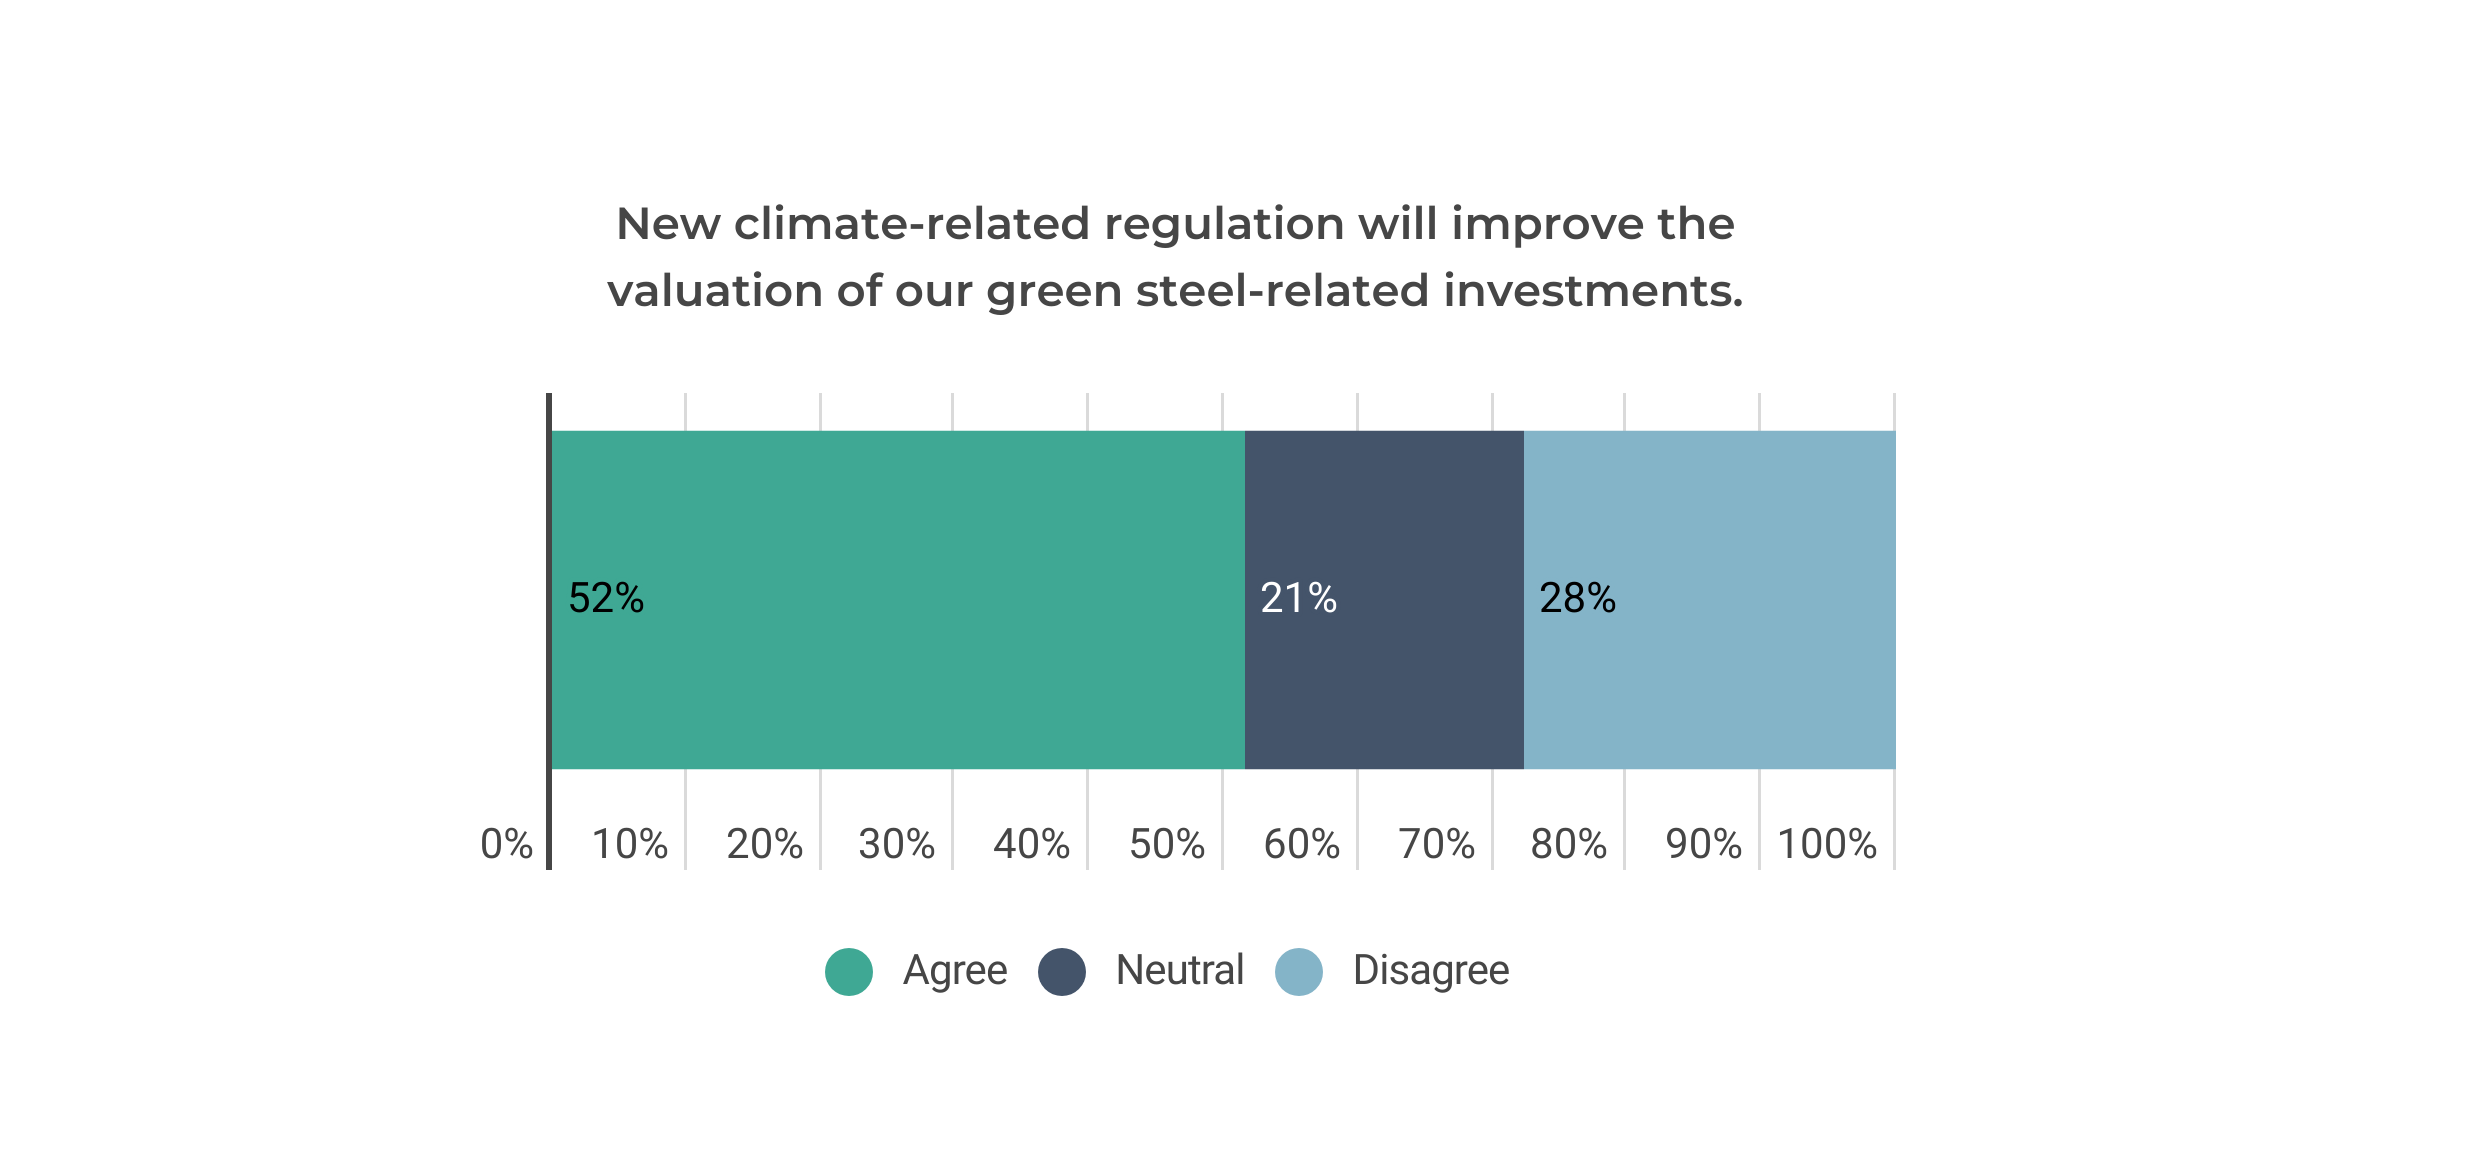 A majority of investors are supportive of incentives and regulations which catalyse the green steel transition.